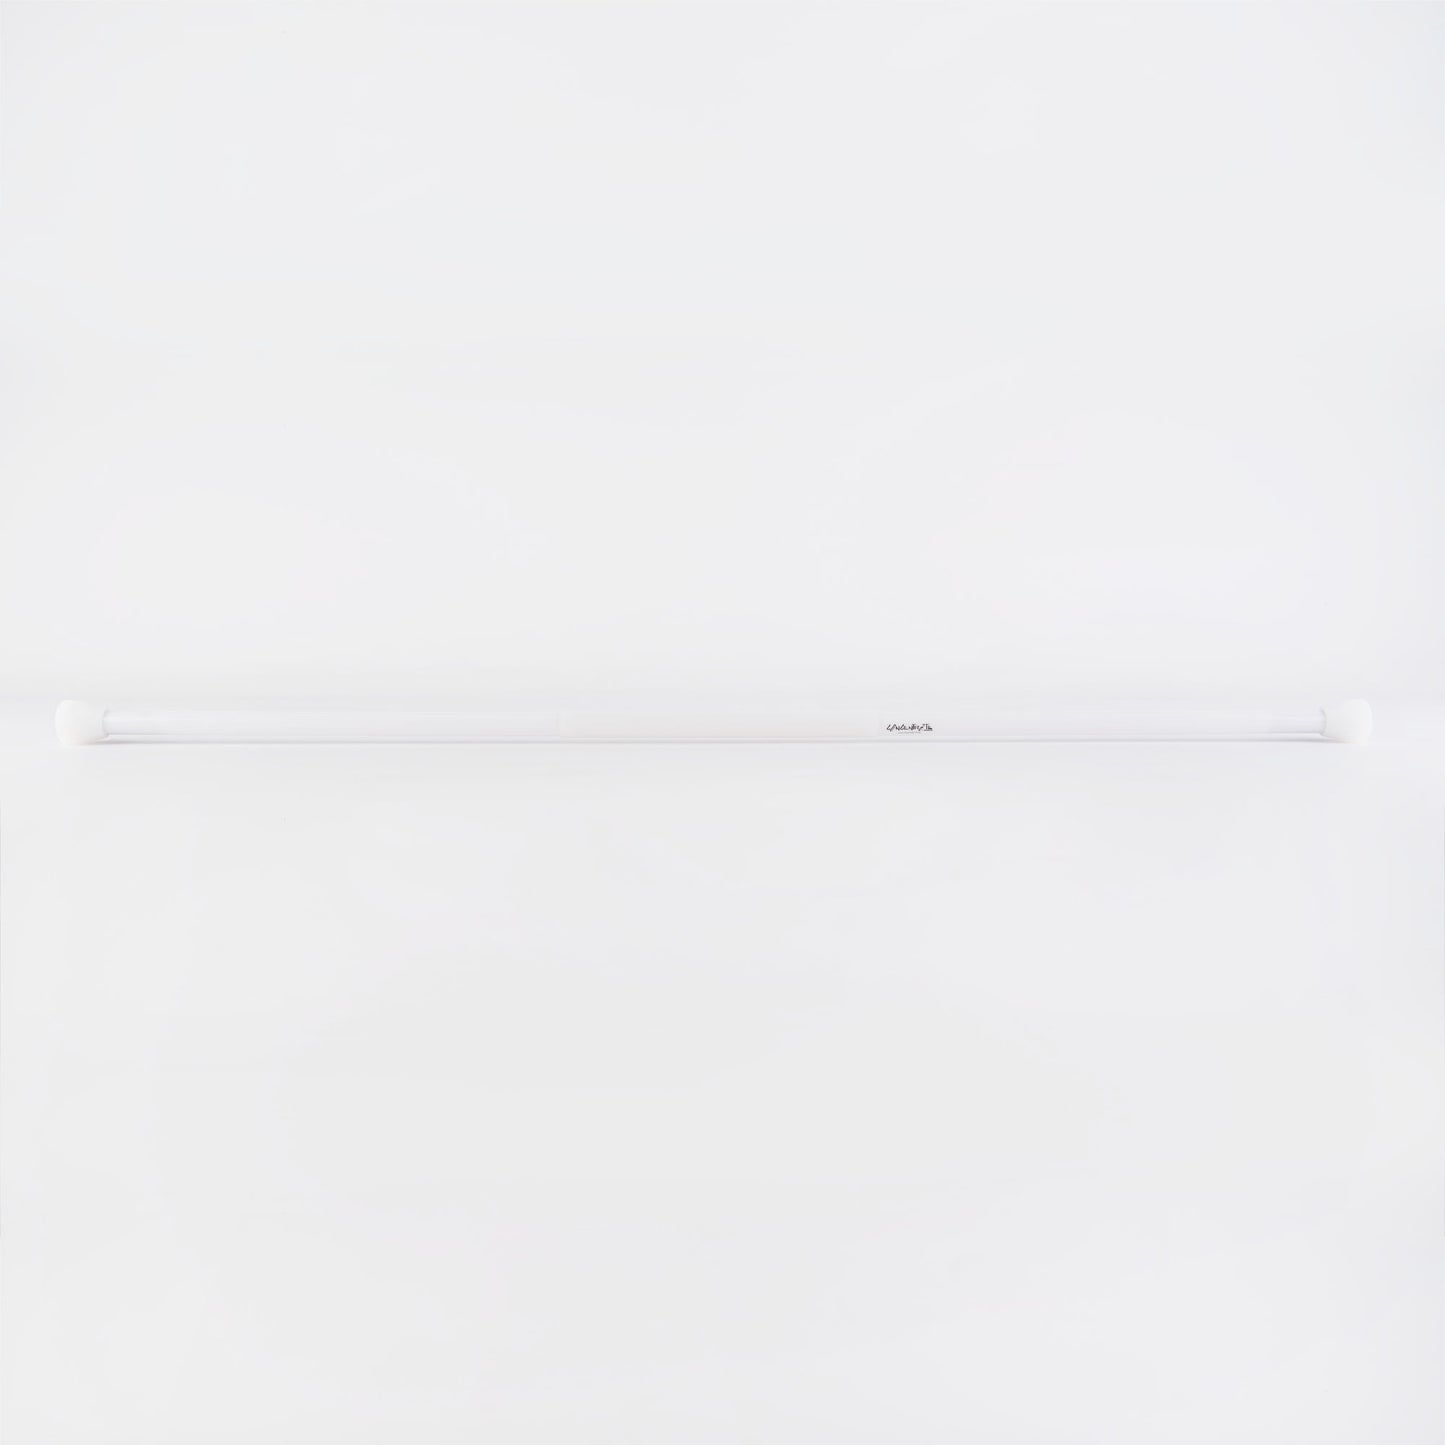 Concentrate Play Series LED Light Staff